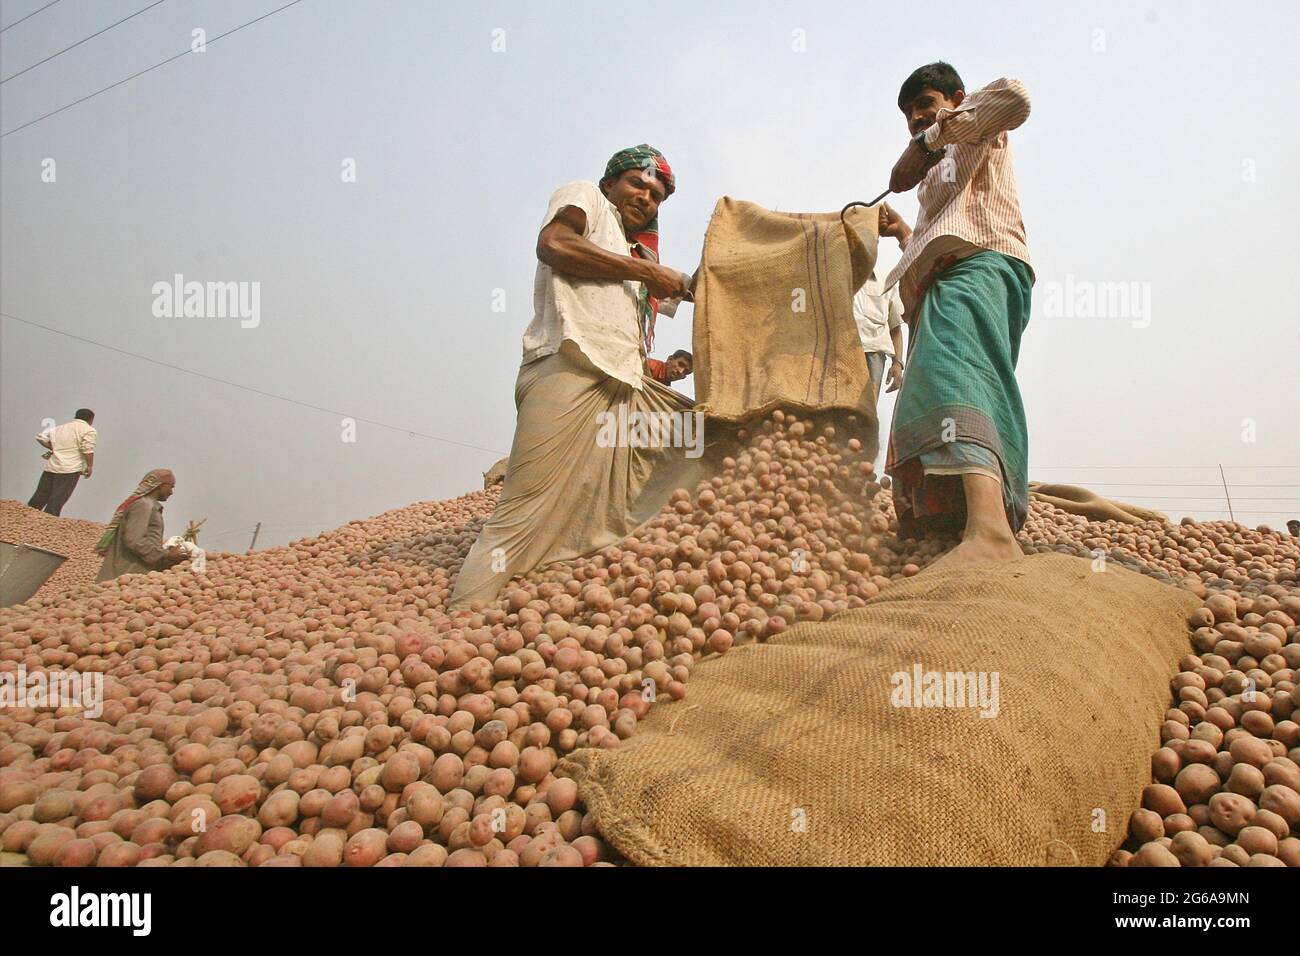 Though the district of Bogra is famous for potato, this years yield is not satisfactory due to bad weather. Potatoes were bought for 350 to 400 taka a mound, about 40 kilograms, last year which has risen up to 550 to 600 taka with the decrease of potato import this year. Despite the high prices dealers are buying potatoes to stock up. Bogra, Bangladesh. March 19, 2009. Stock Photo